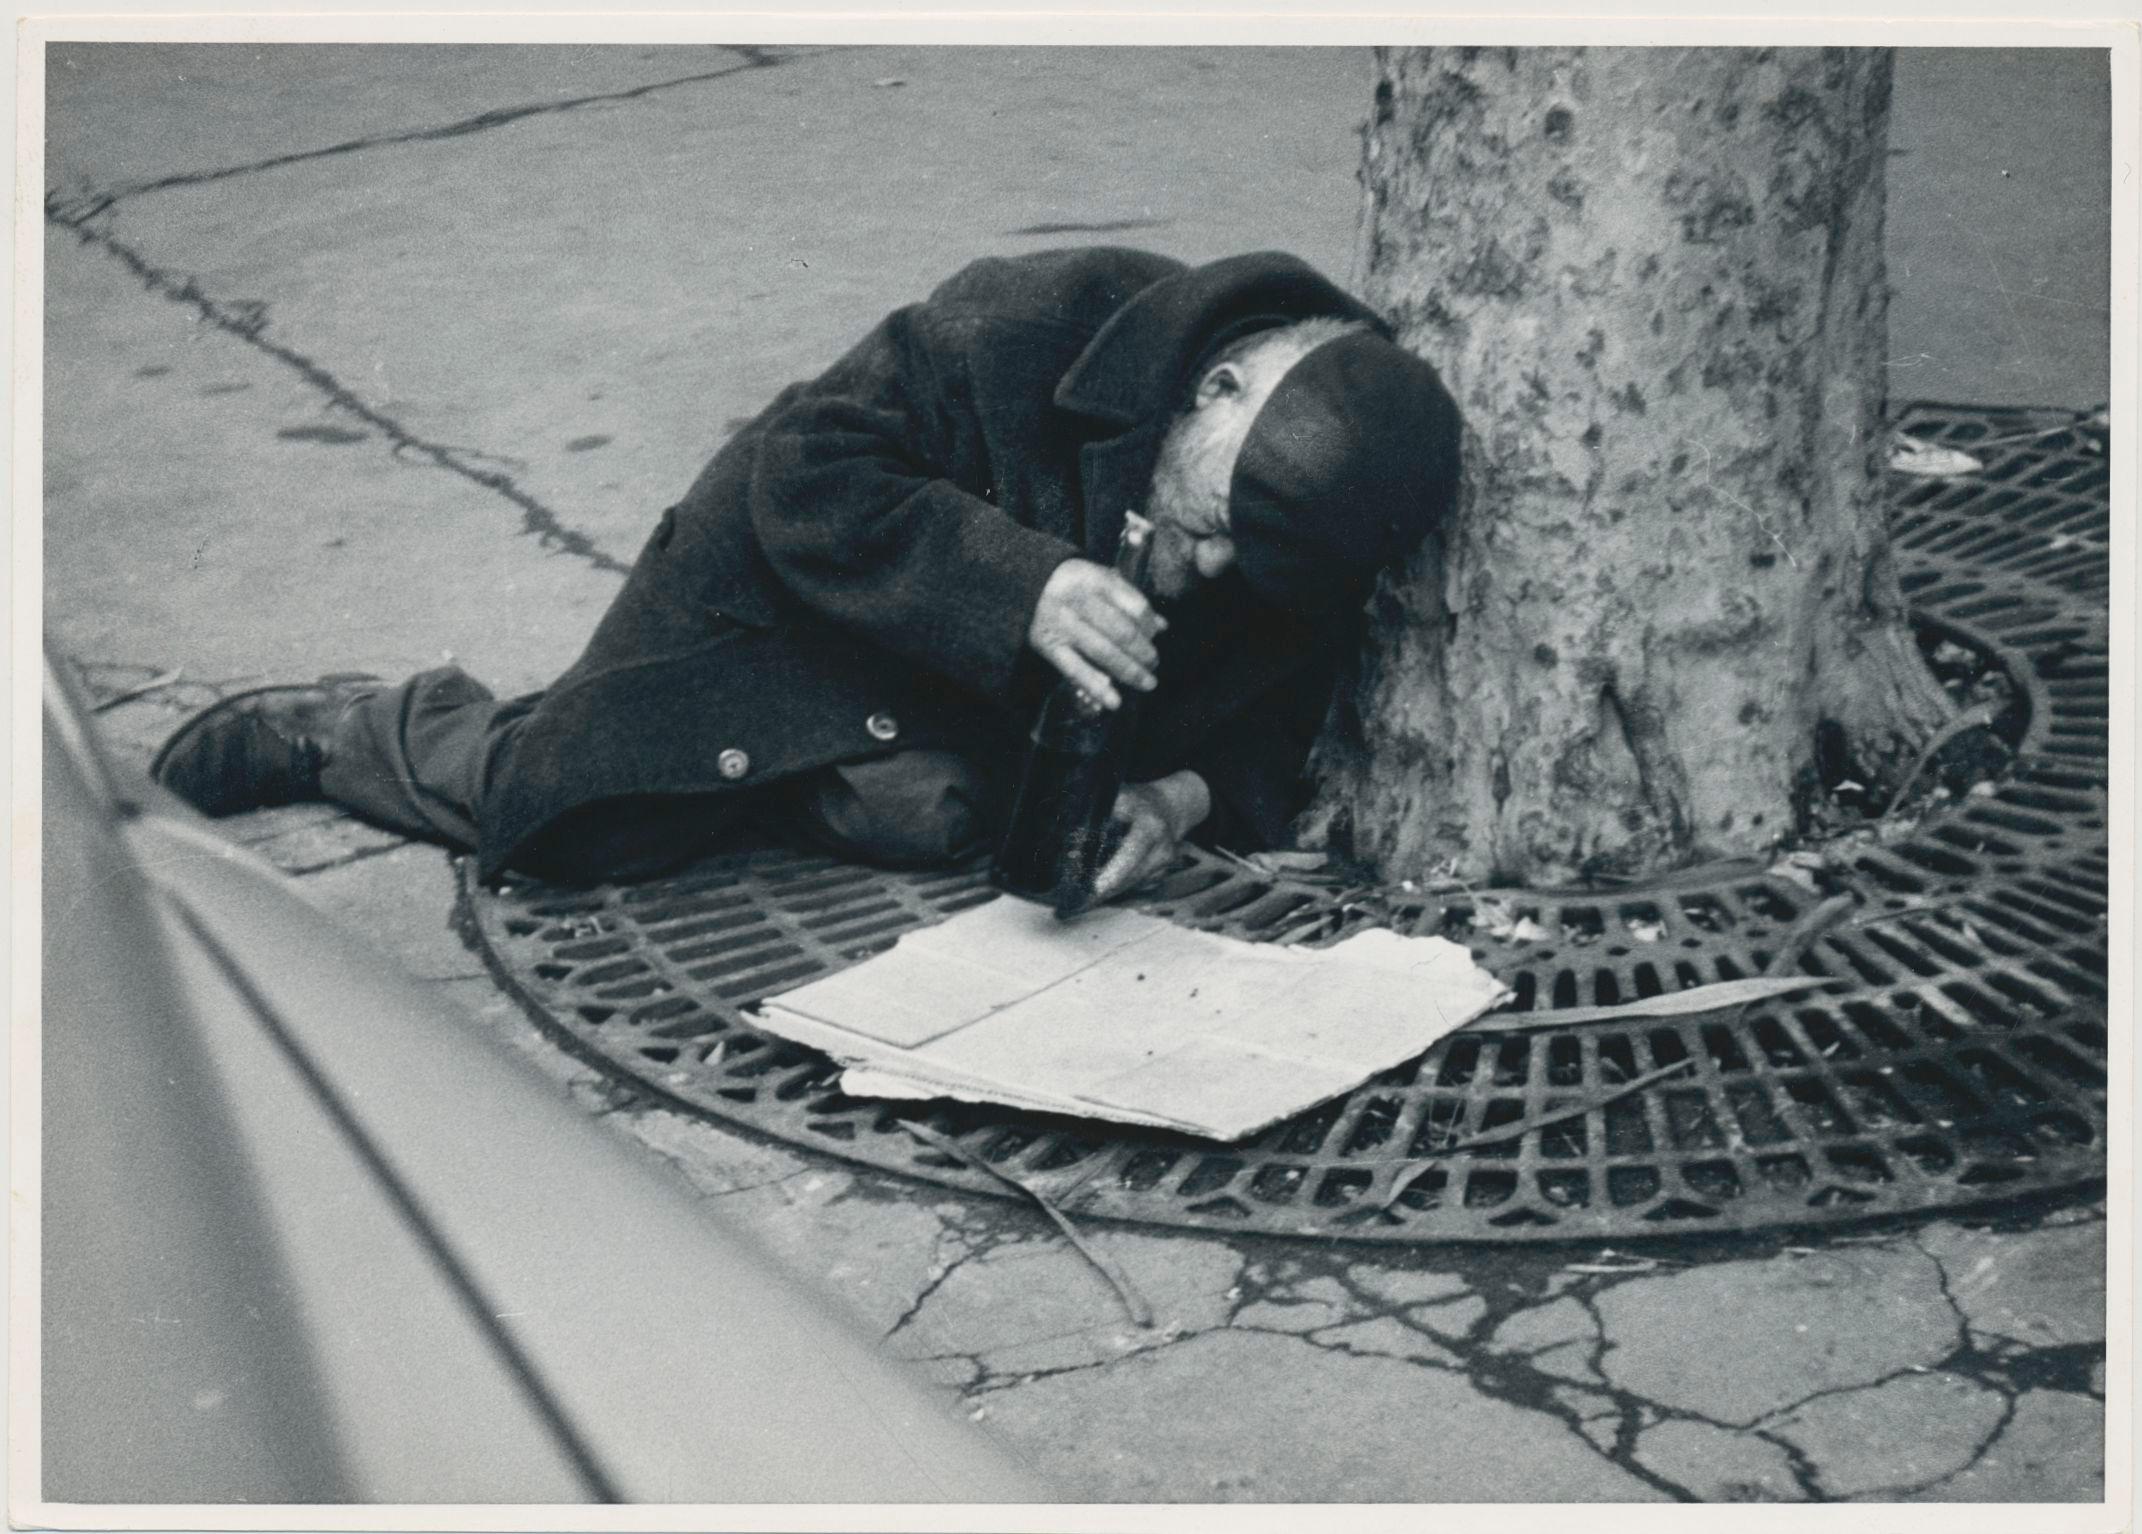 Erich Andres Black and White Photograph - Homeless man, Street Photography, Paris, France 1950s, 12, 8 x 18 cm